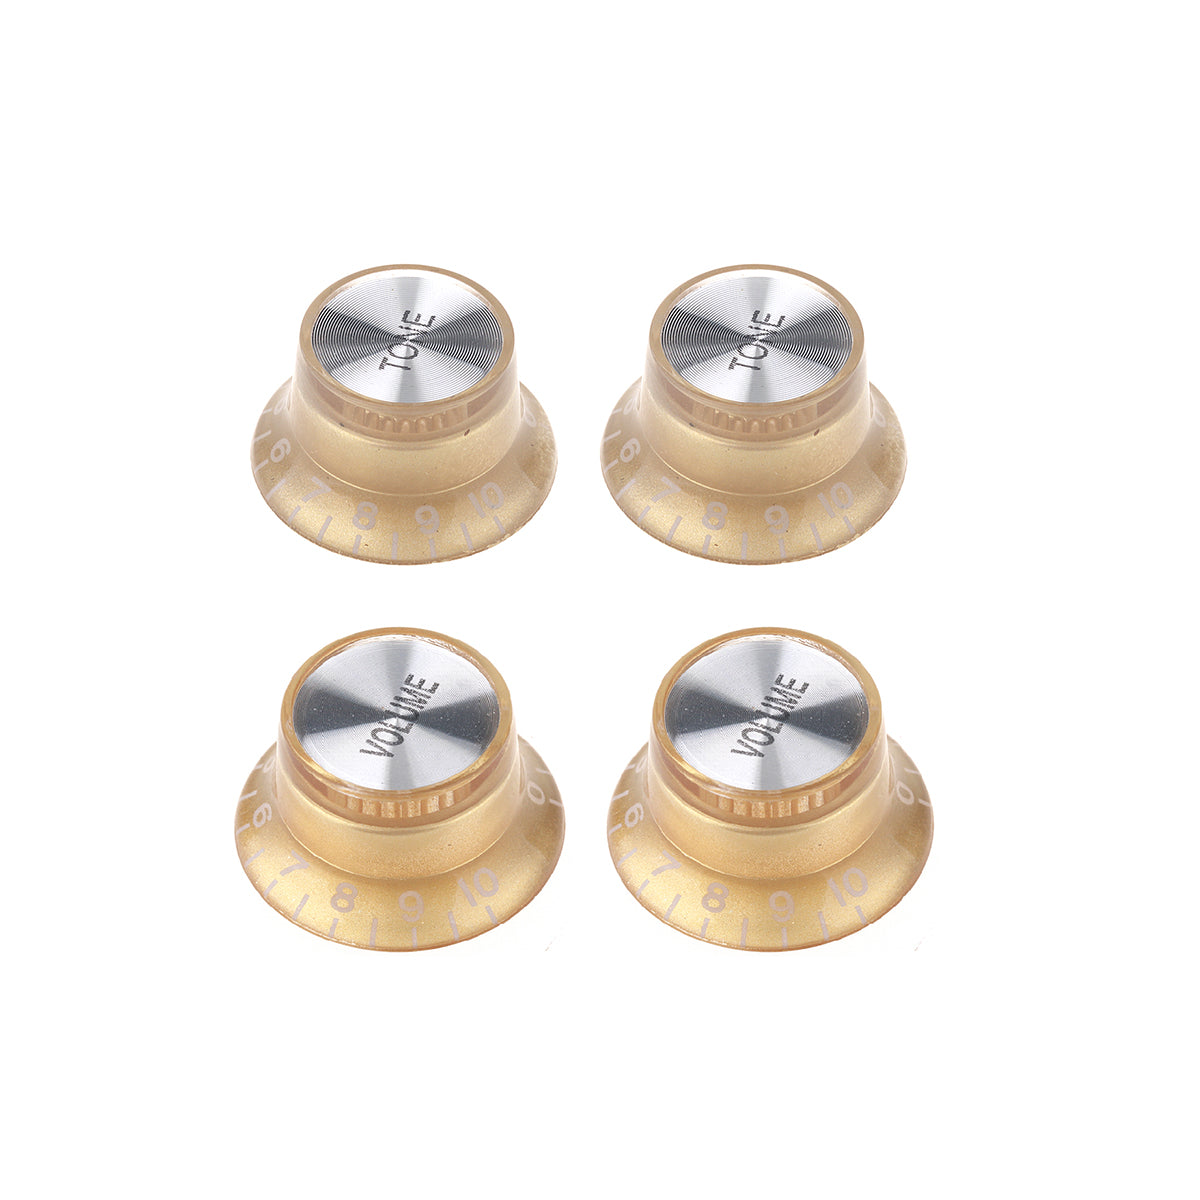 Musiclily Plastic Metric 2 Volume and 2 Tone Control Knobs for Les Paul Style Electric Guitar, Gold